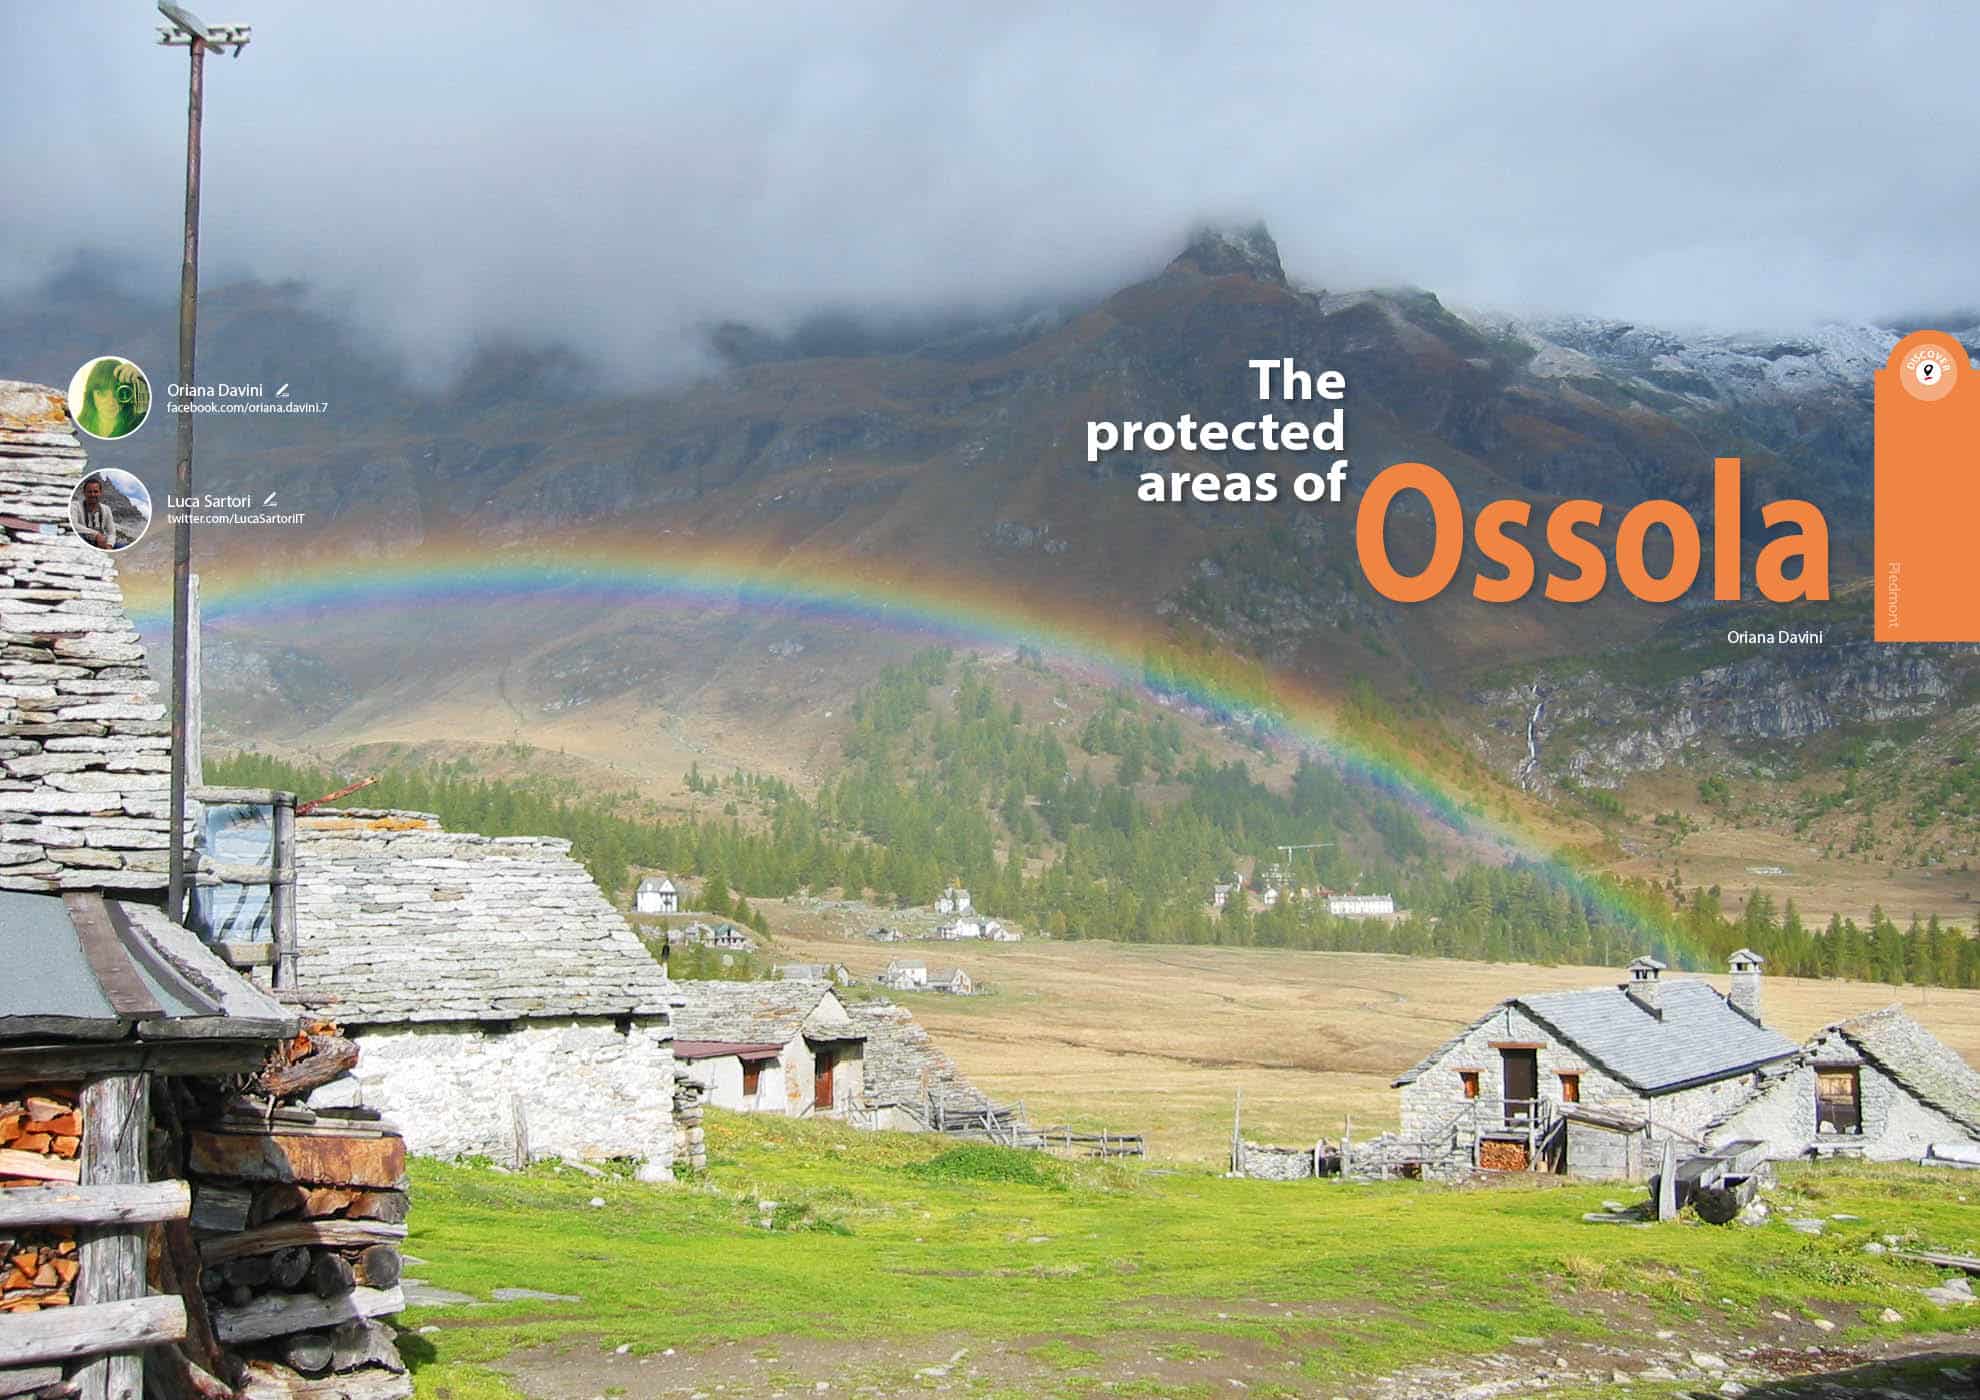 e-borghi travel 3: Parks and villages - The protected areas of Ossola